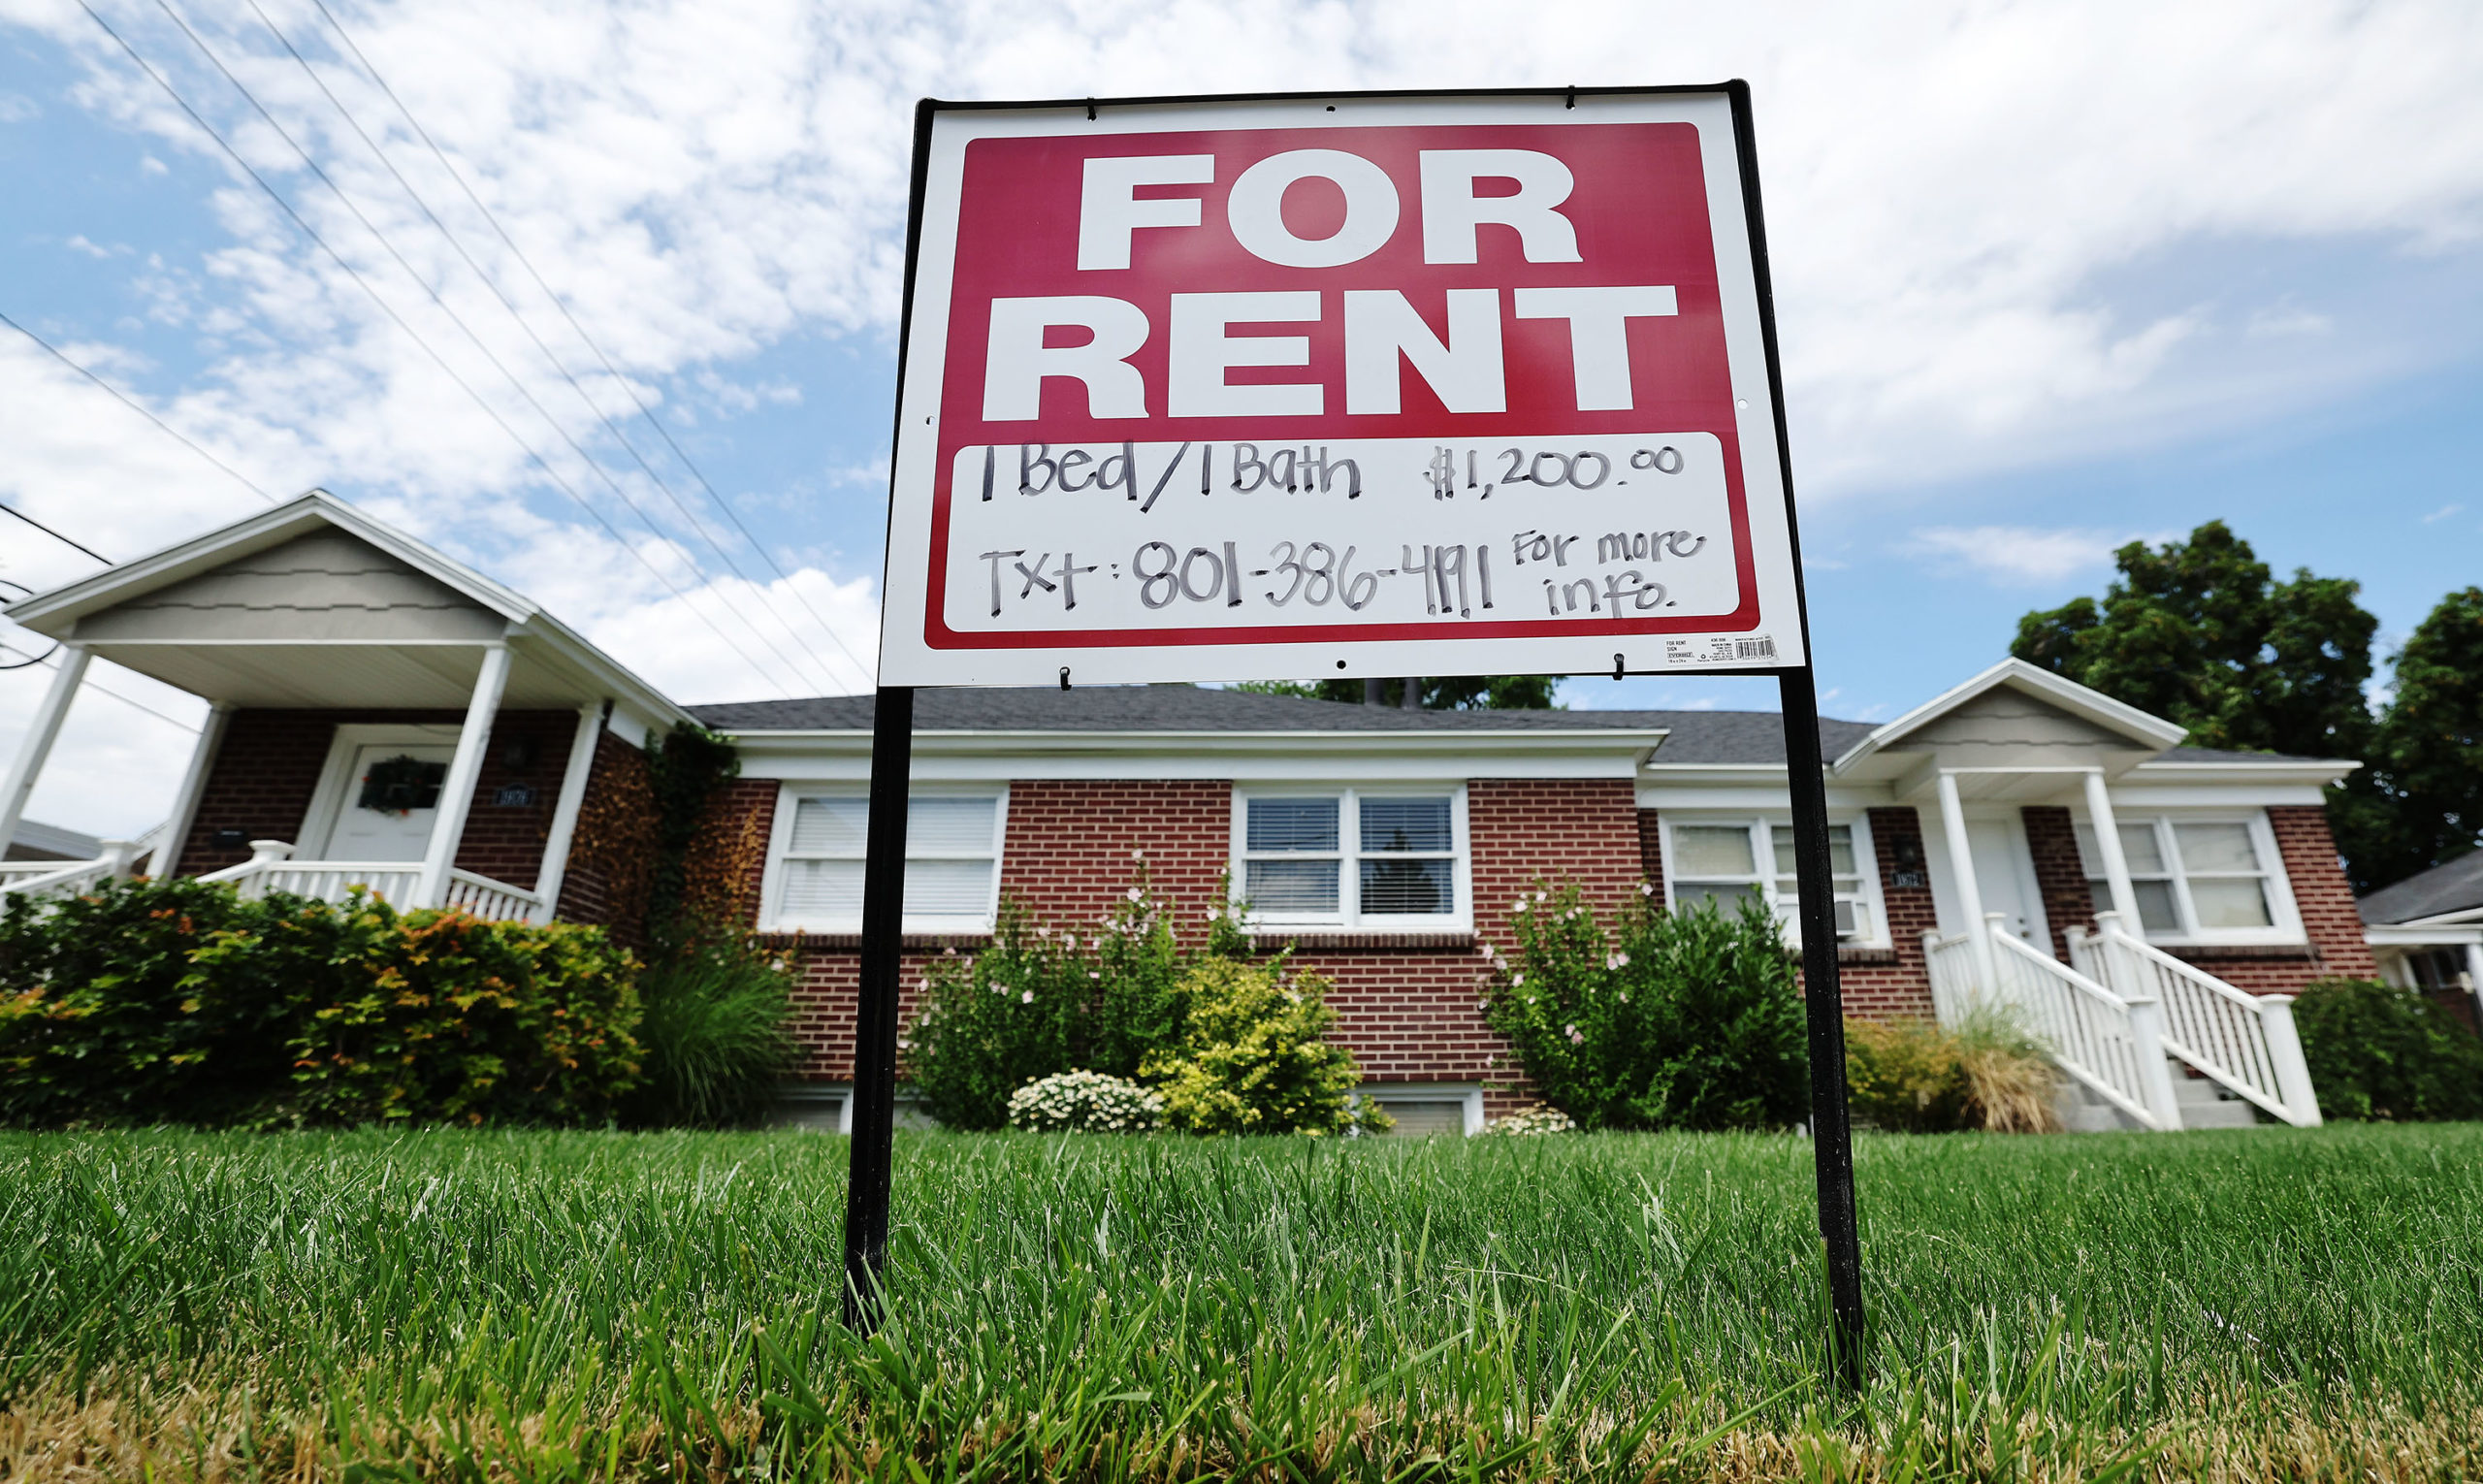 Apartments for rent in Sugar House on Wednesday, July 13, 2022. (Jeffrey D. Allred, Deseret News)...